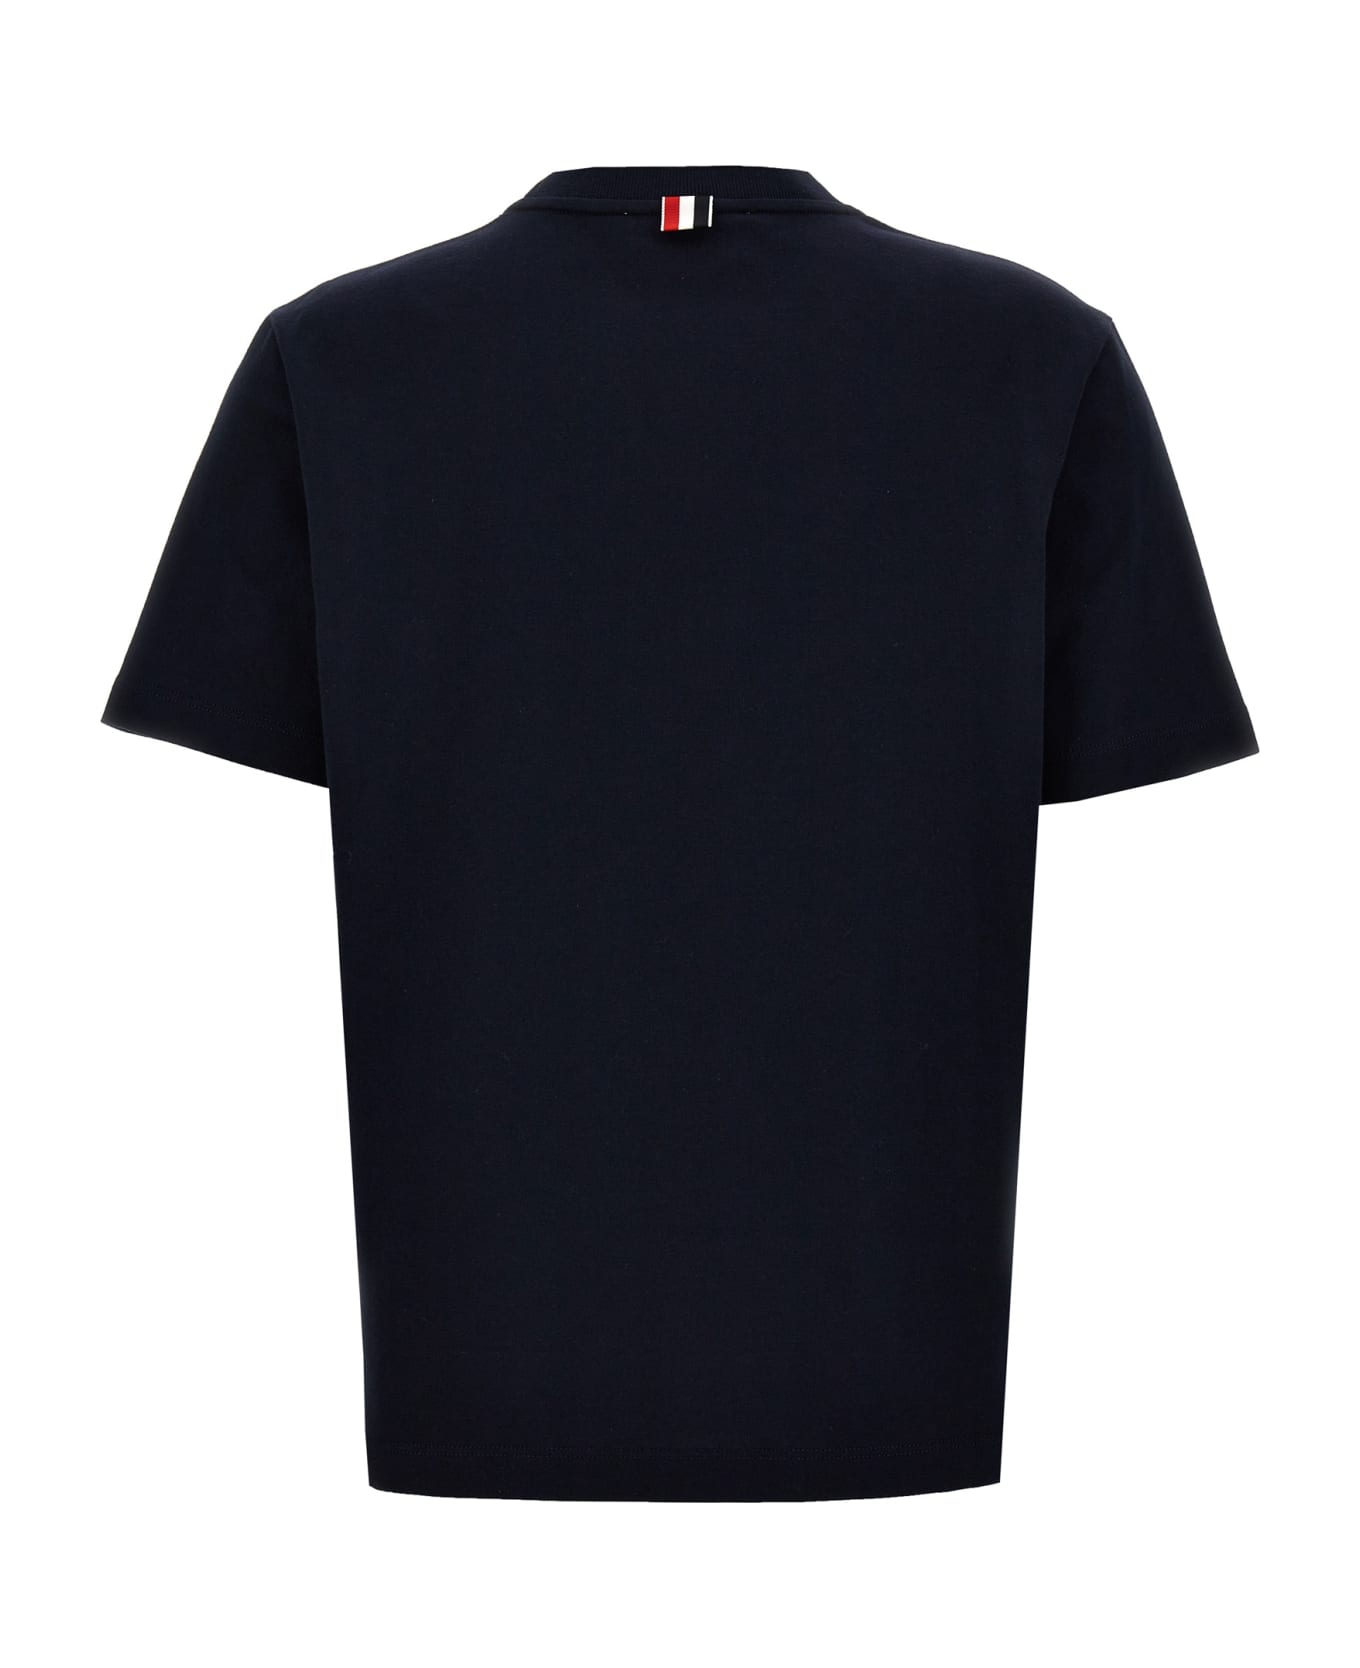 Thom Browne 'hector With A Hat' T-shirt - Blue